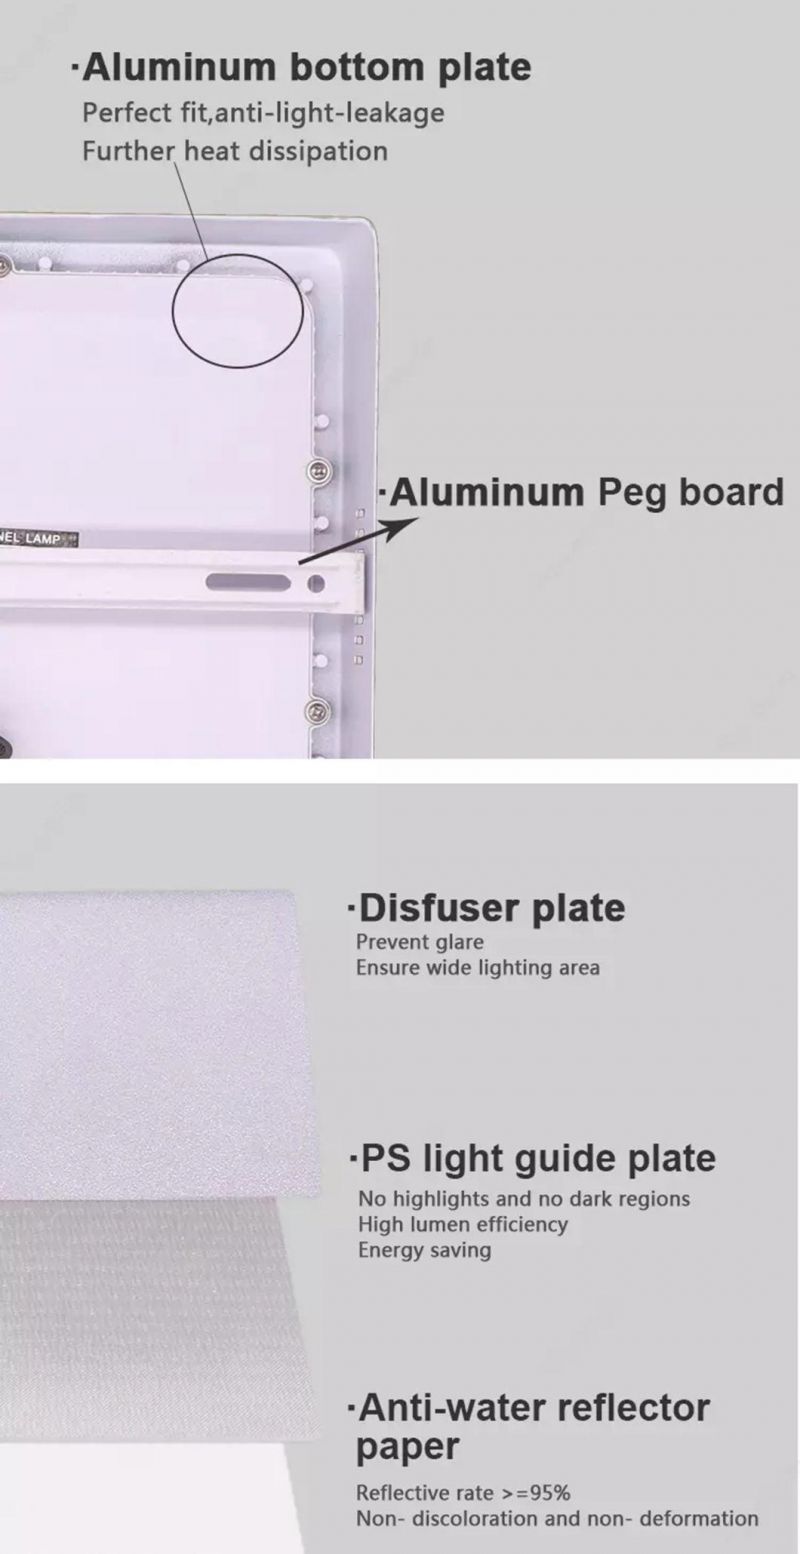 Surface Embedded SMD AC200-240V LED Ceiling Panel Light with High Quality LED Panel Light